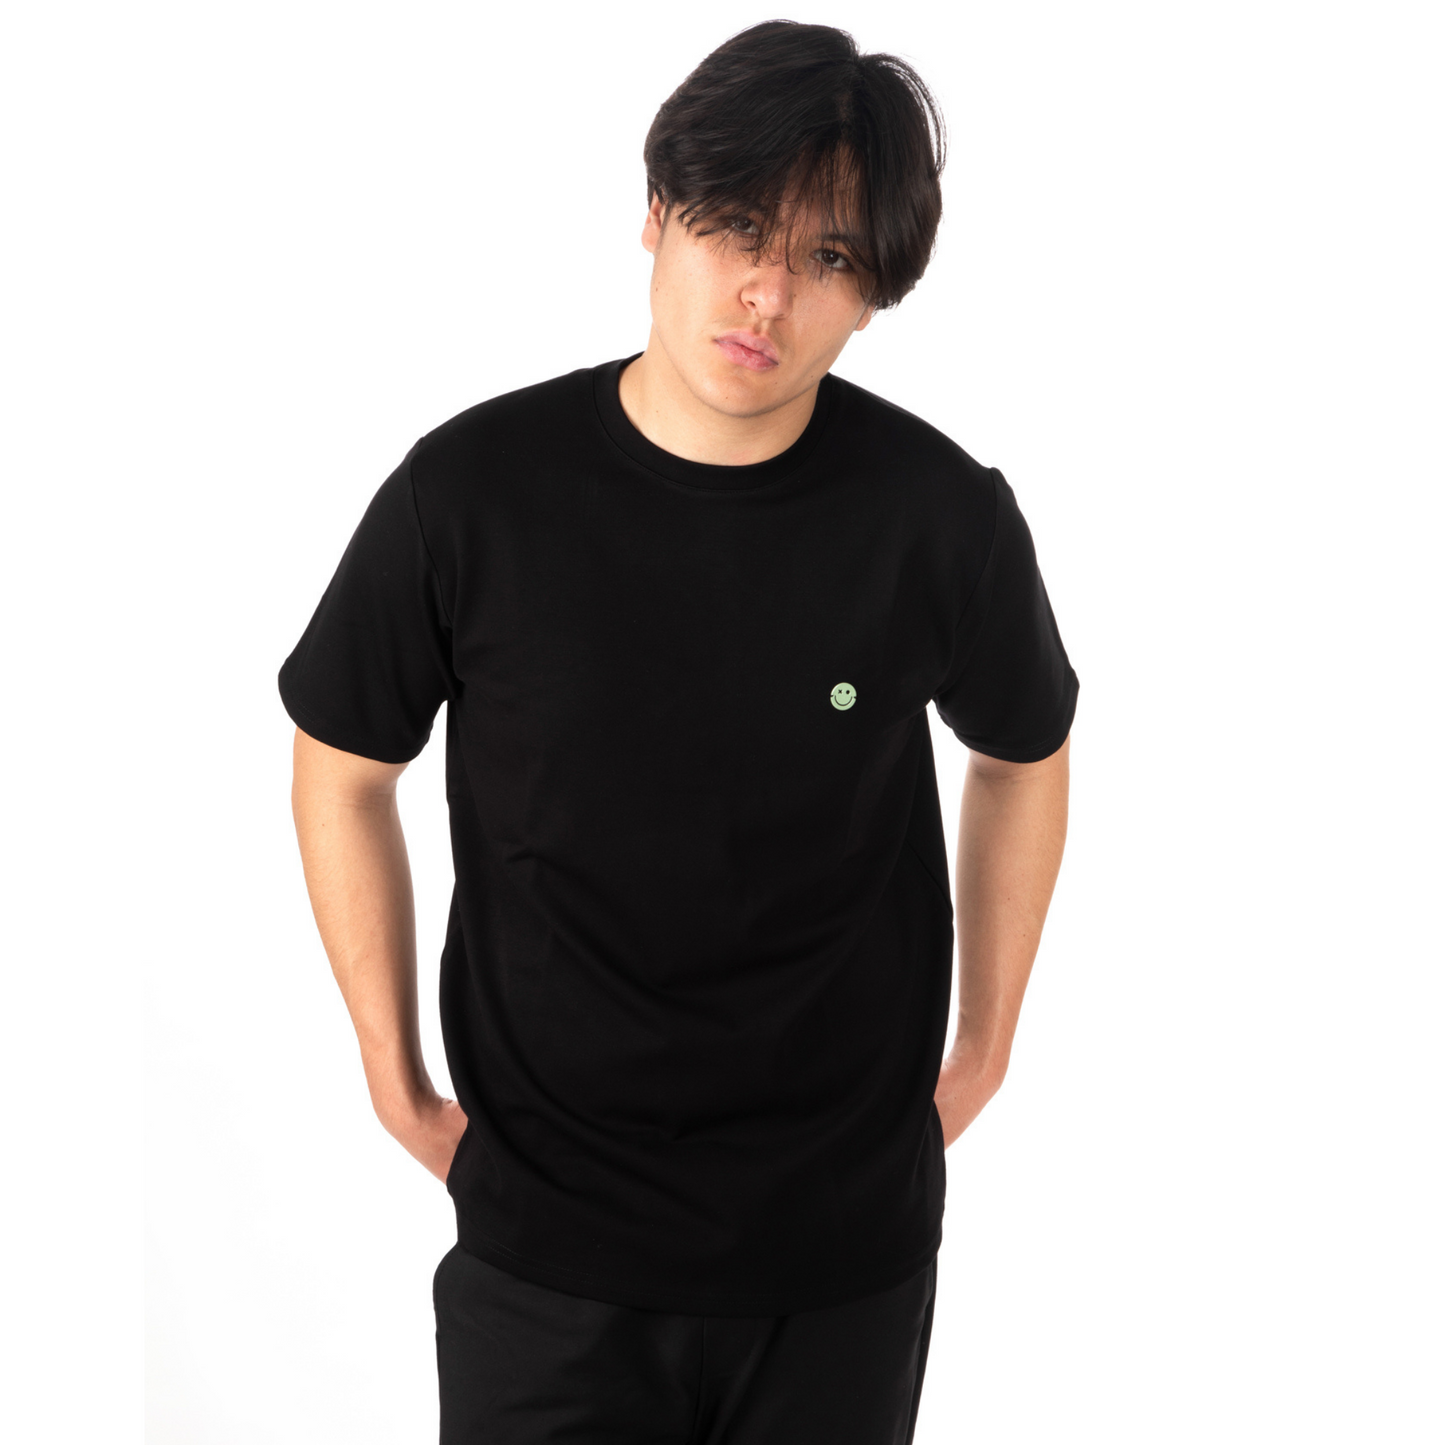 L’Homme Moderne Black T-shirt with Mint Smiley zoomed view on male model